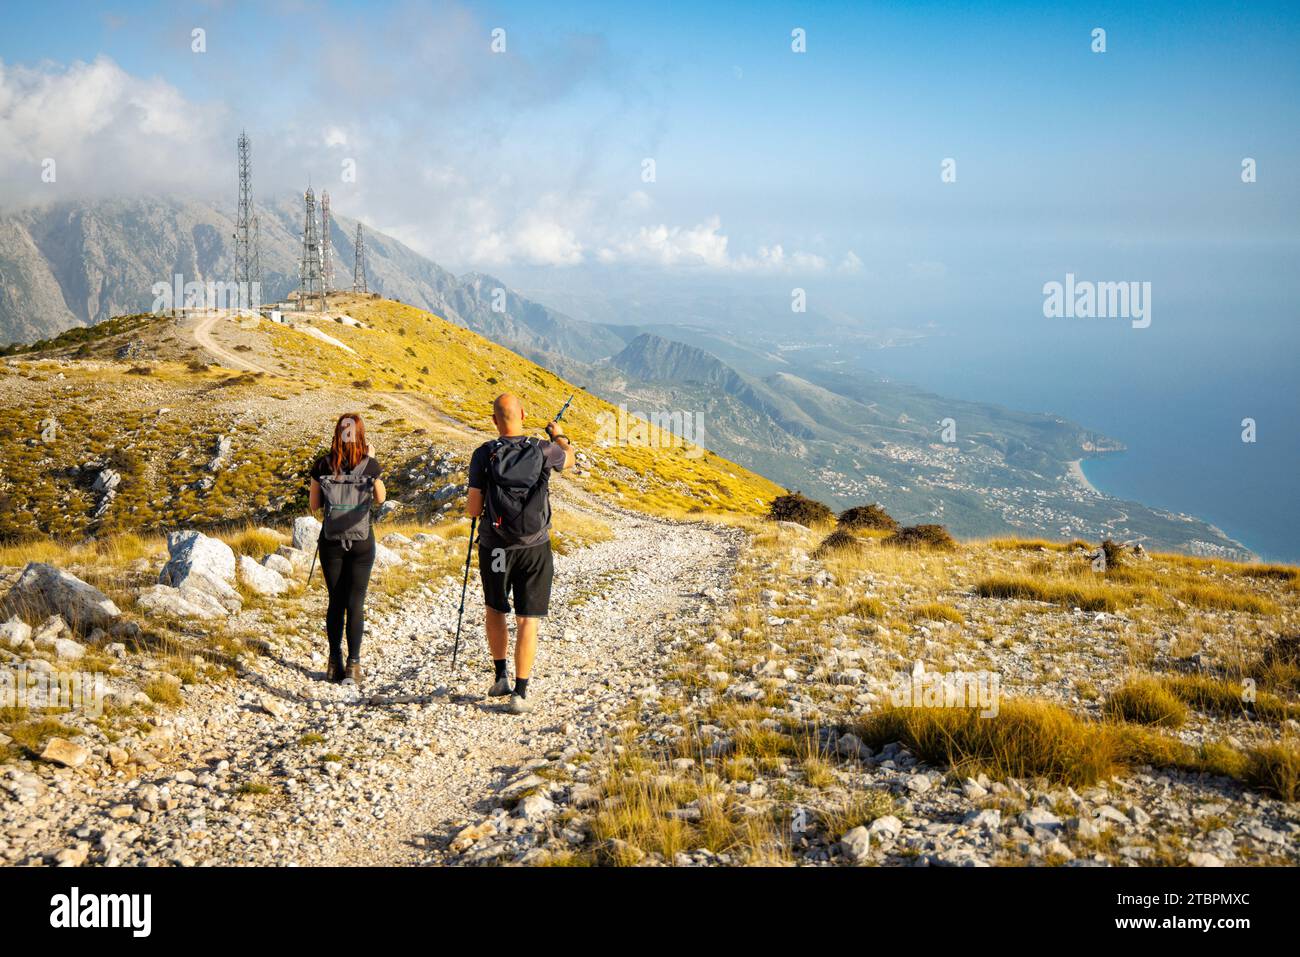 Hikers on a Mountain Trail with a Coastal View in Southern Albania Stock Photo